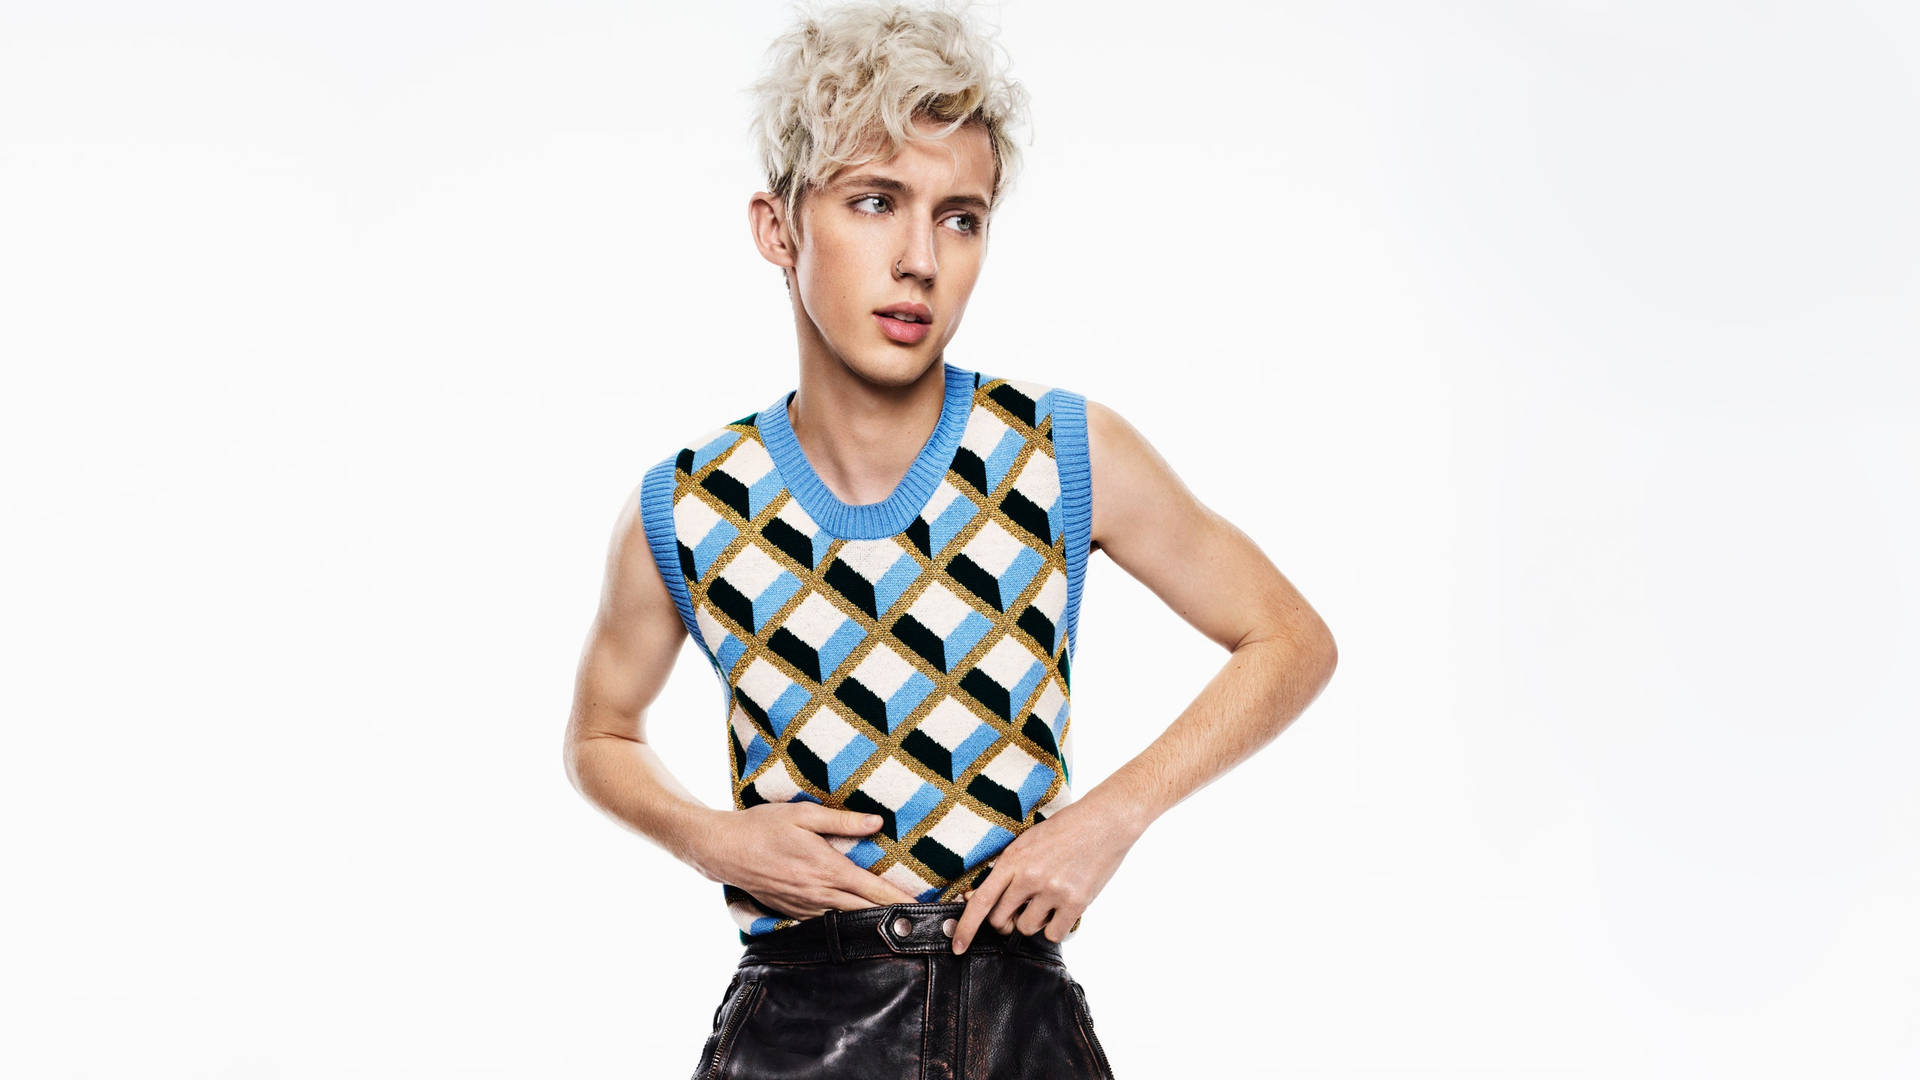 Troyesivan I Blå Retrokläder. (this Would Be An Appropriate Caption For A Computer Or Mobile Wallpaper Featuring A Photo Of Troye Sivan Wearing Blue Retro Clothing.) Wallpaper